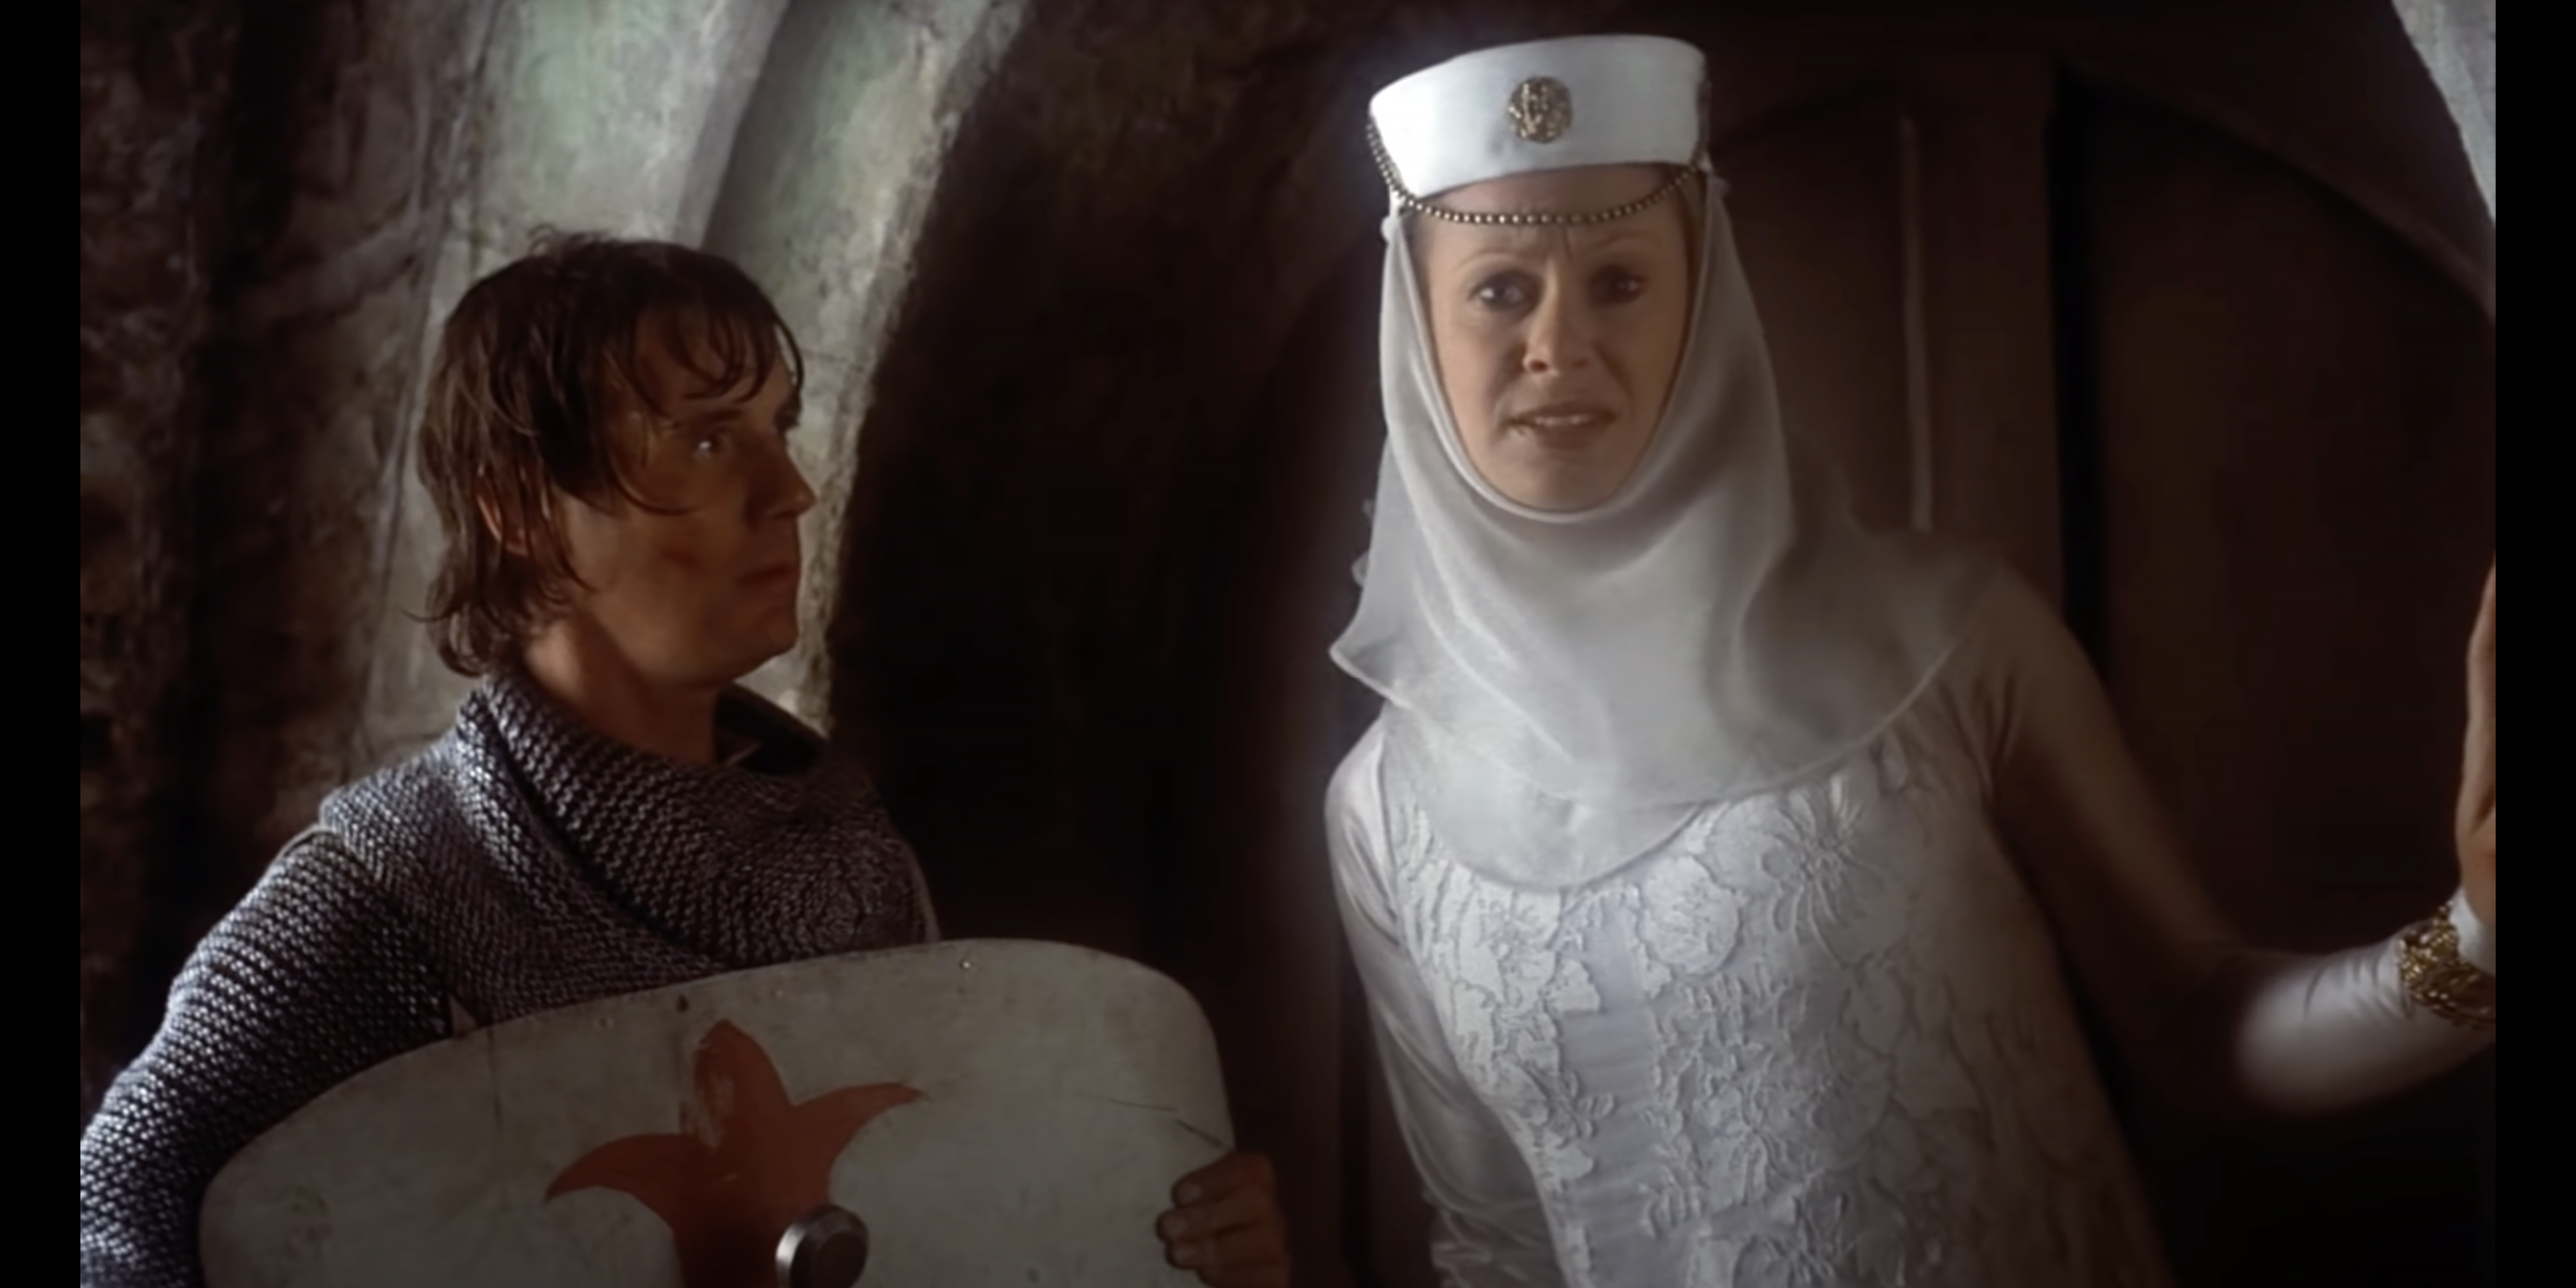 Fond of fourth wall breakage, the Monty Python boys went to town in 'Monty Python and the Holy Grail'